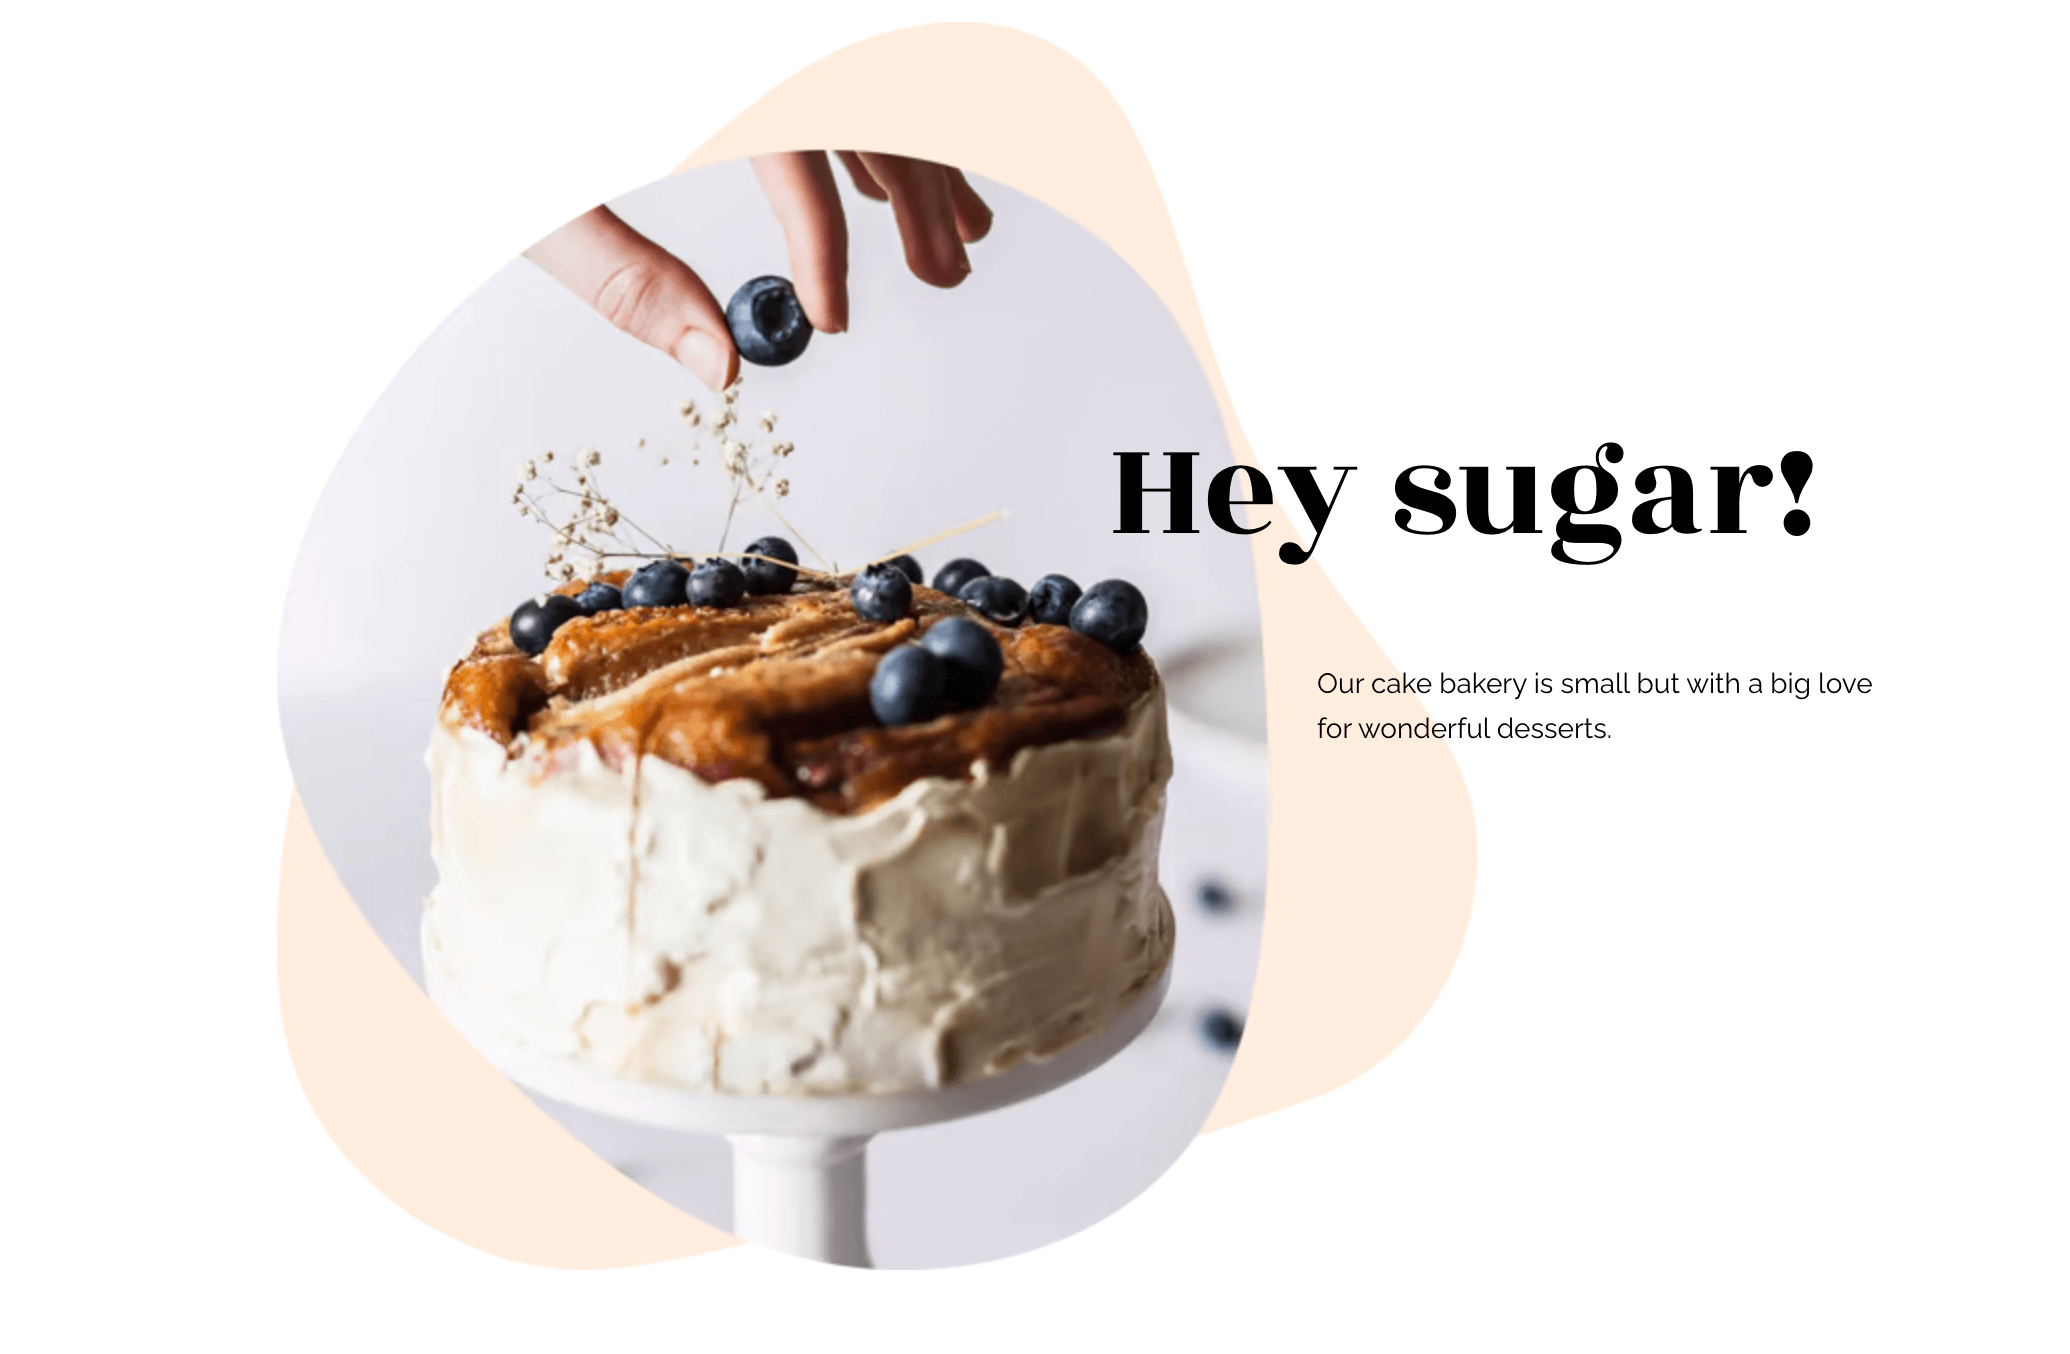 Sugaro's website header featuring a closeup of a hand decorating a cake and the words "hey sugar!"